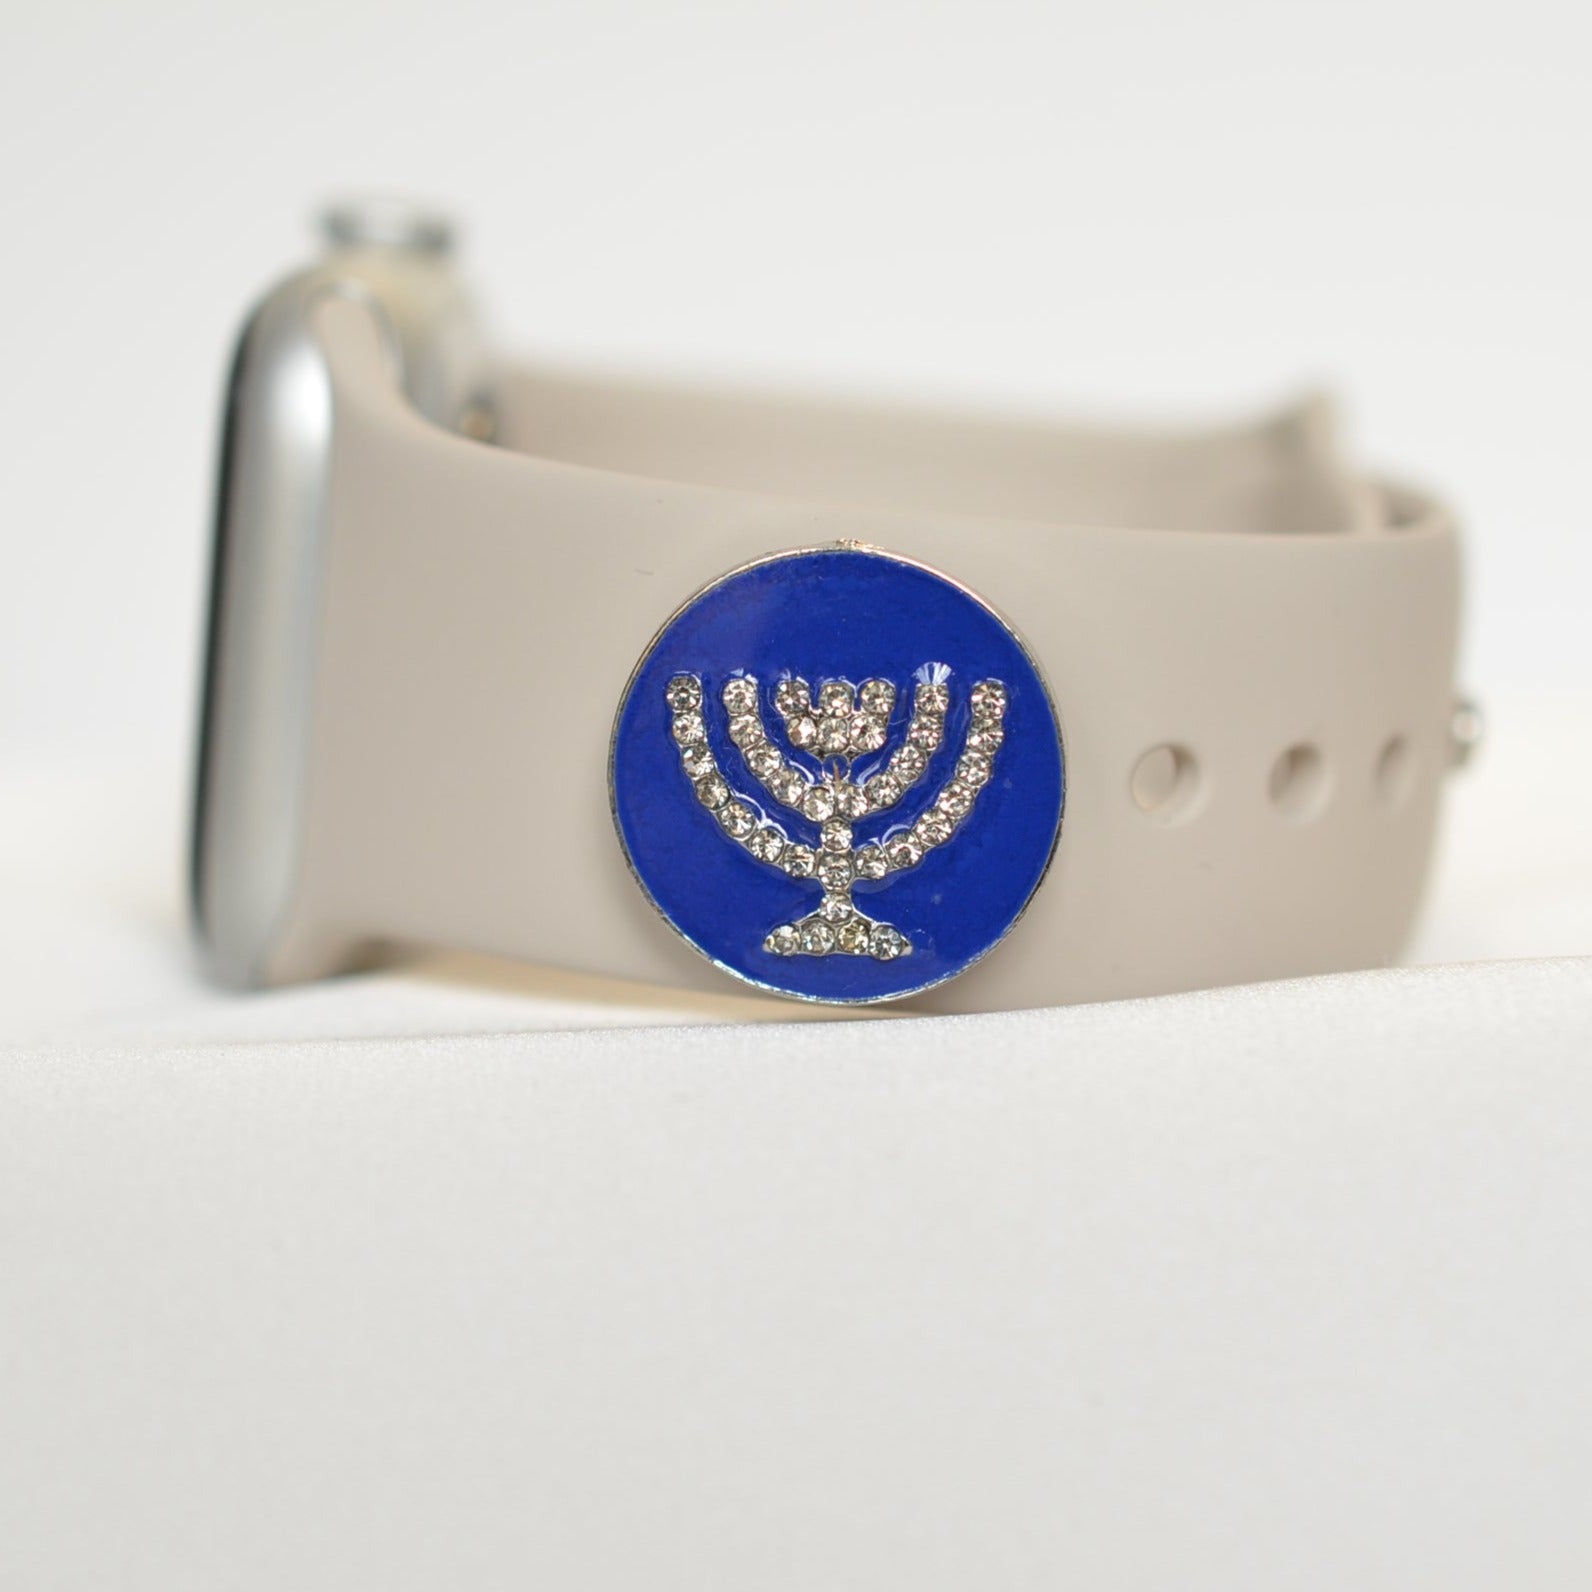 Hannukah Belt, Bag and Watch Band Charm